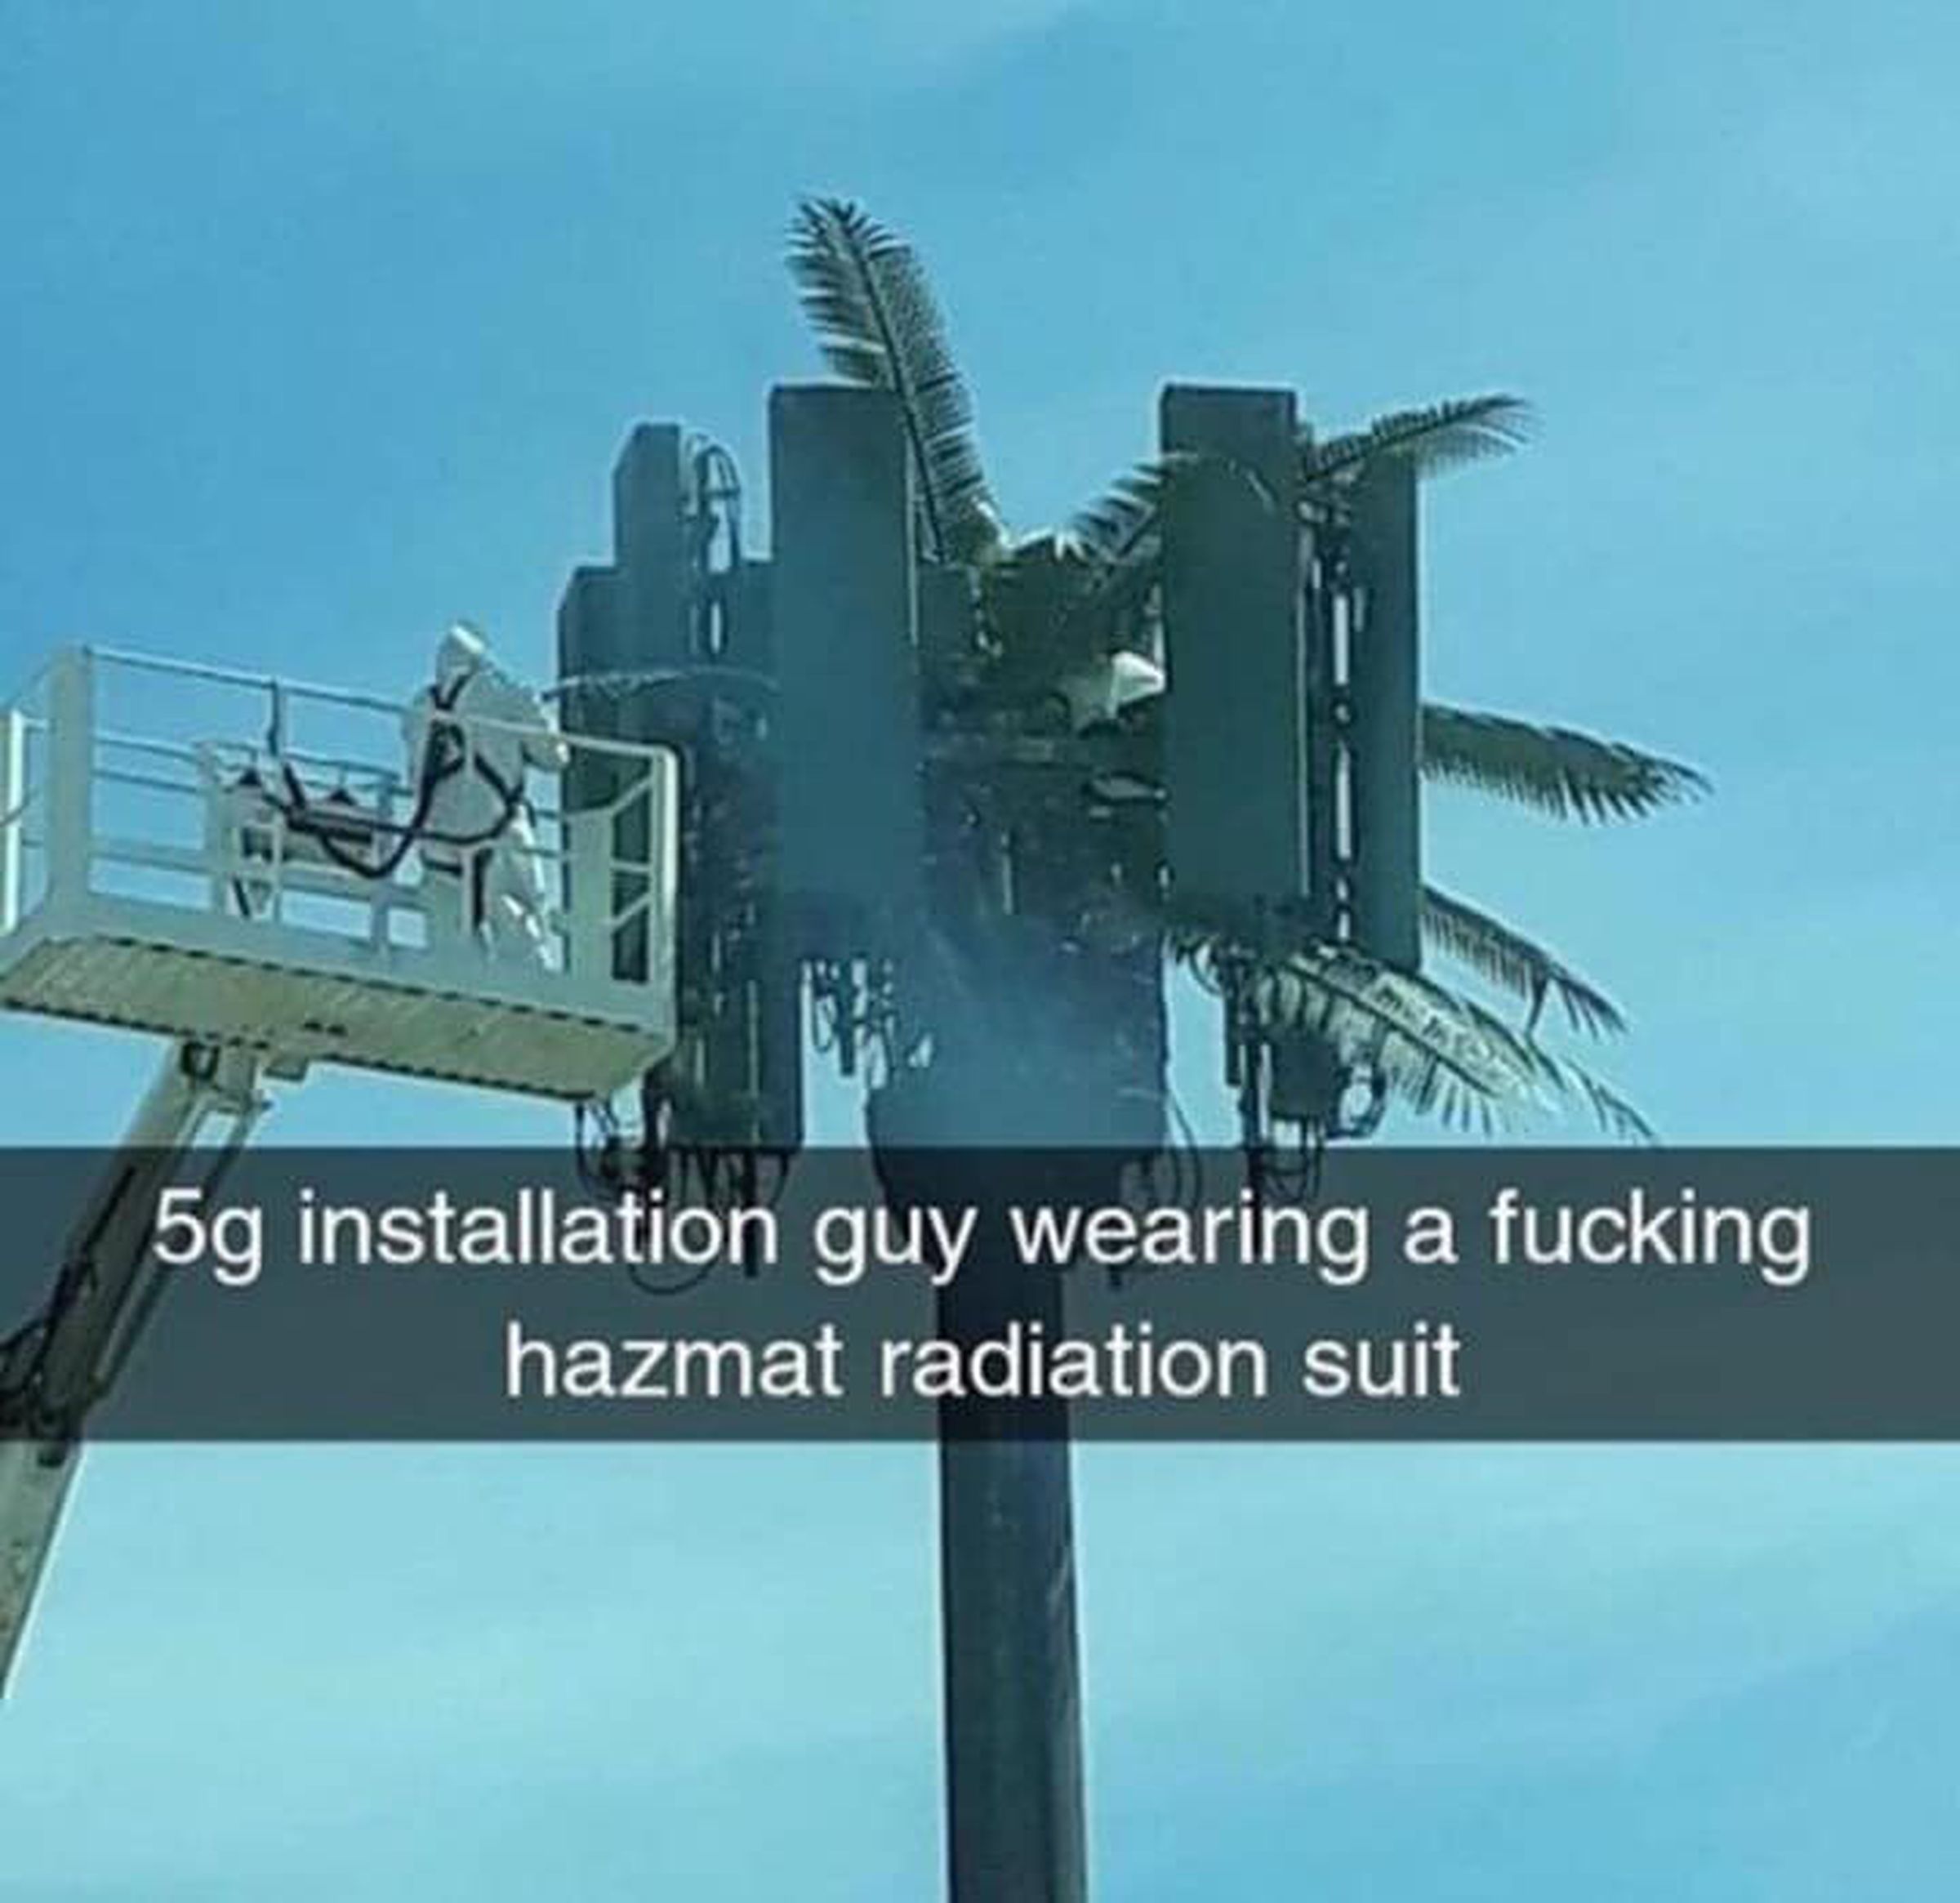 A viral image that supposedly shows a man in a hazmat suit cleaning a 5G mast.